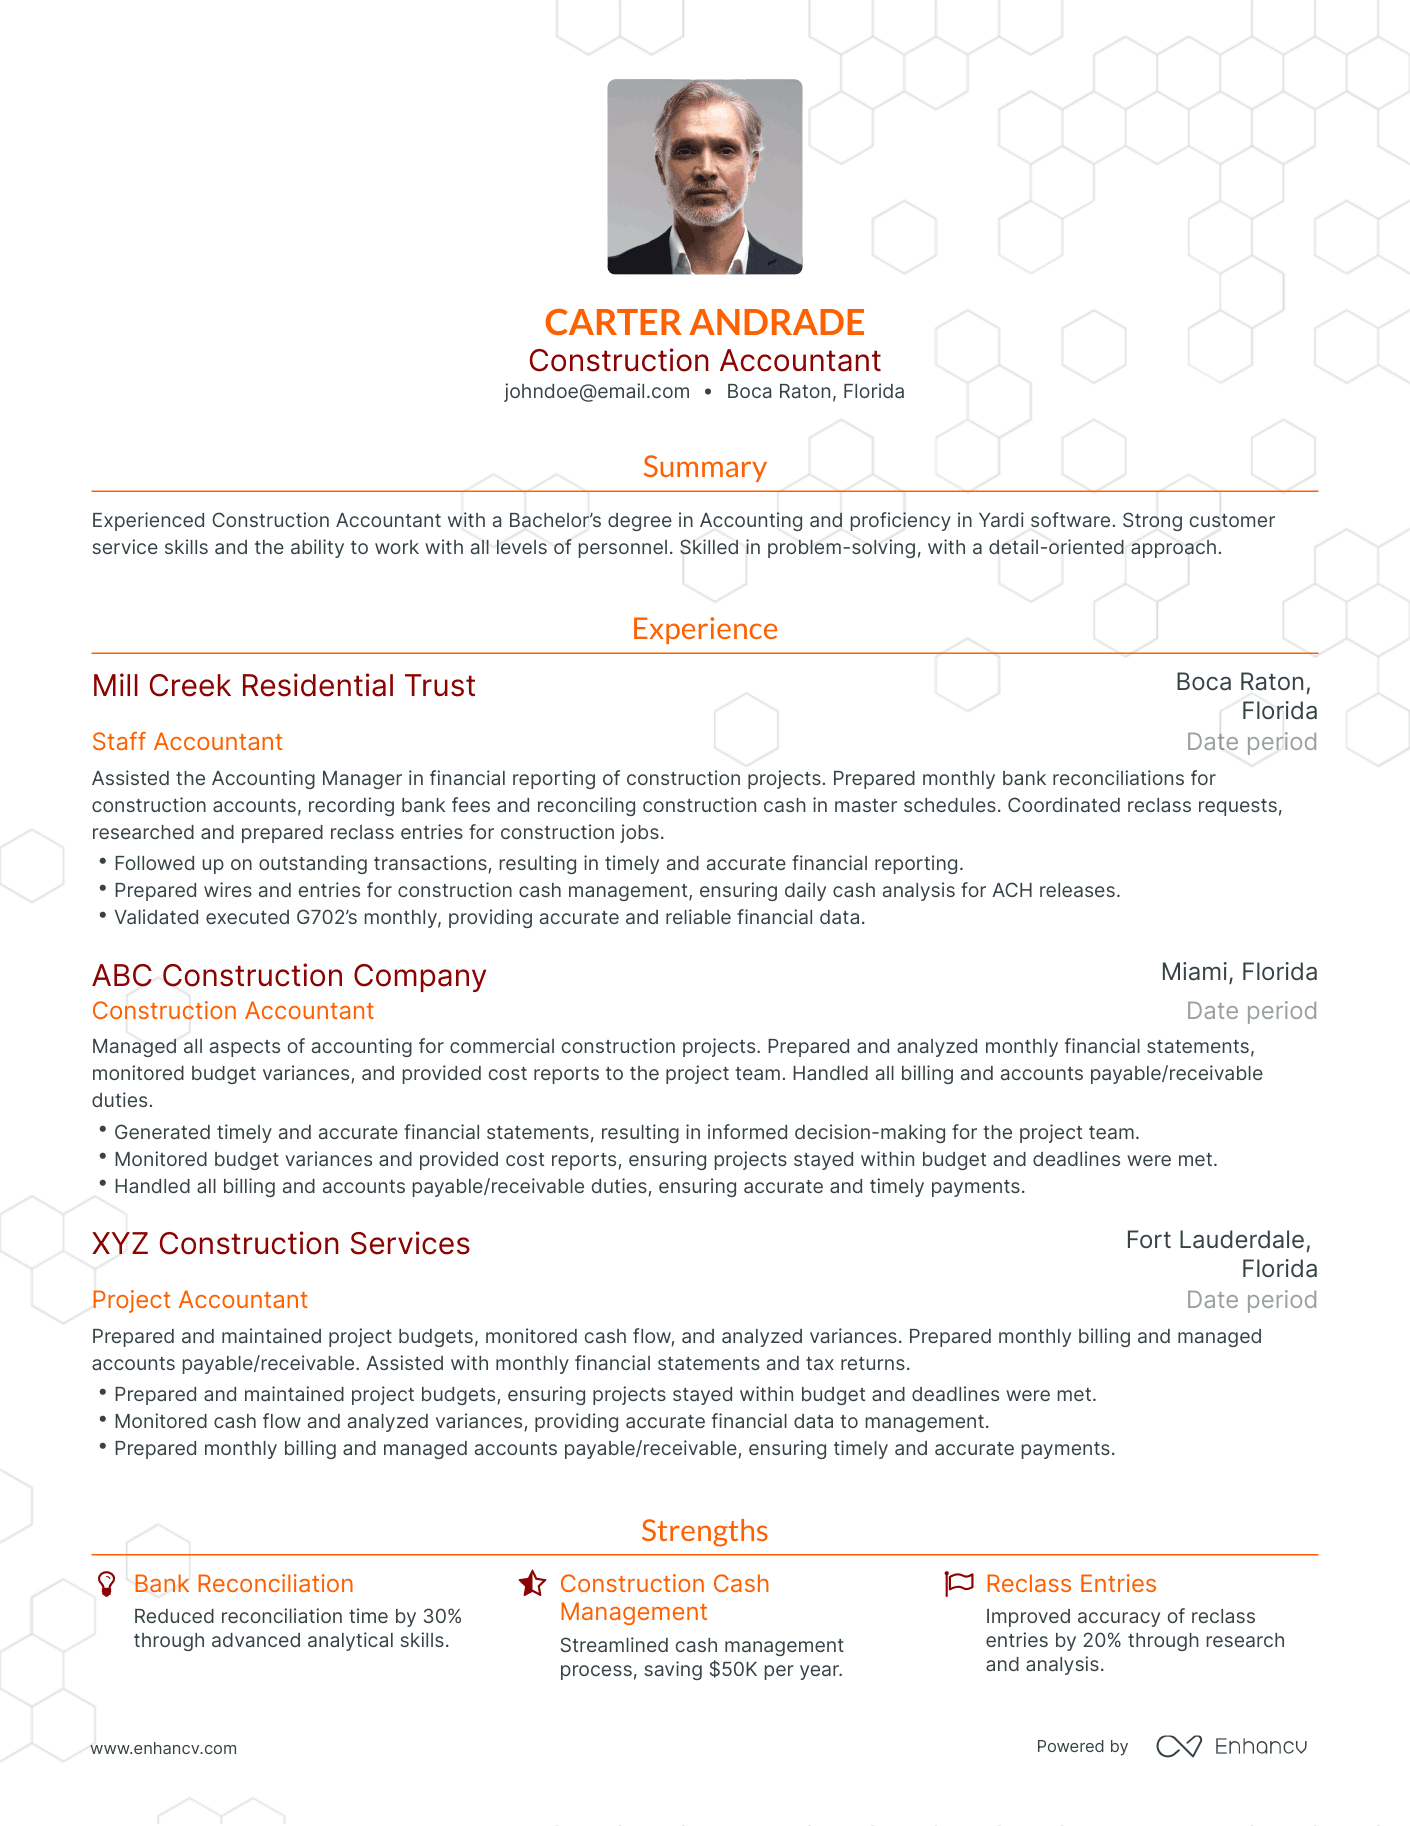 Traditional Construction Accounting Resume Template